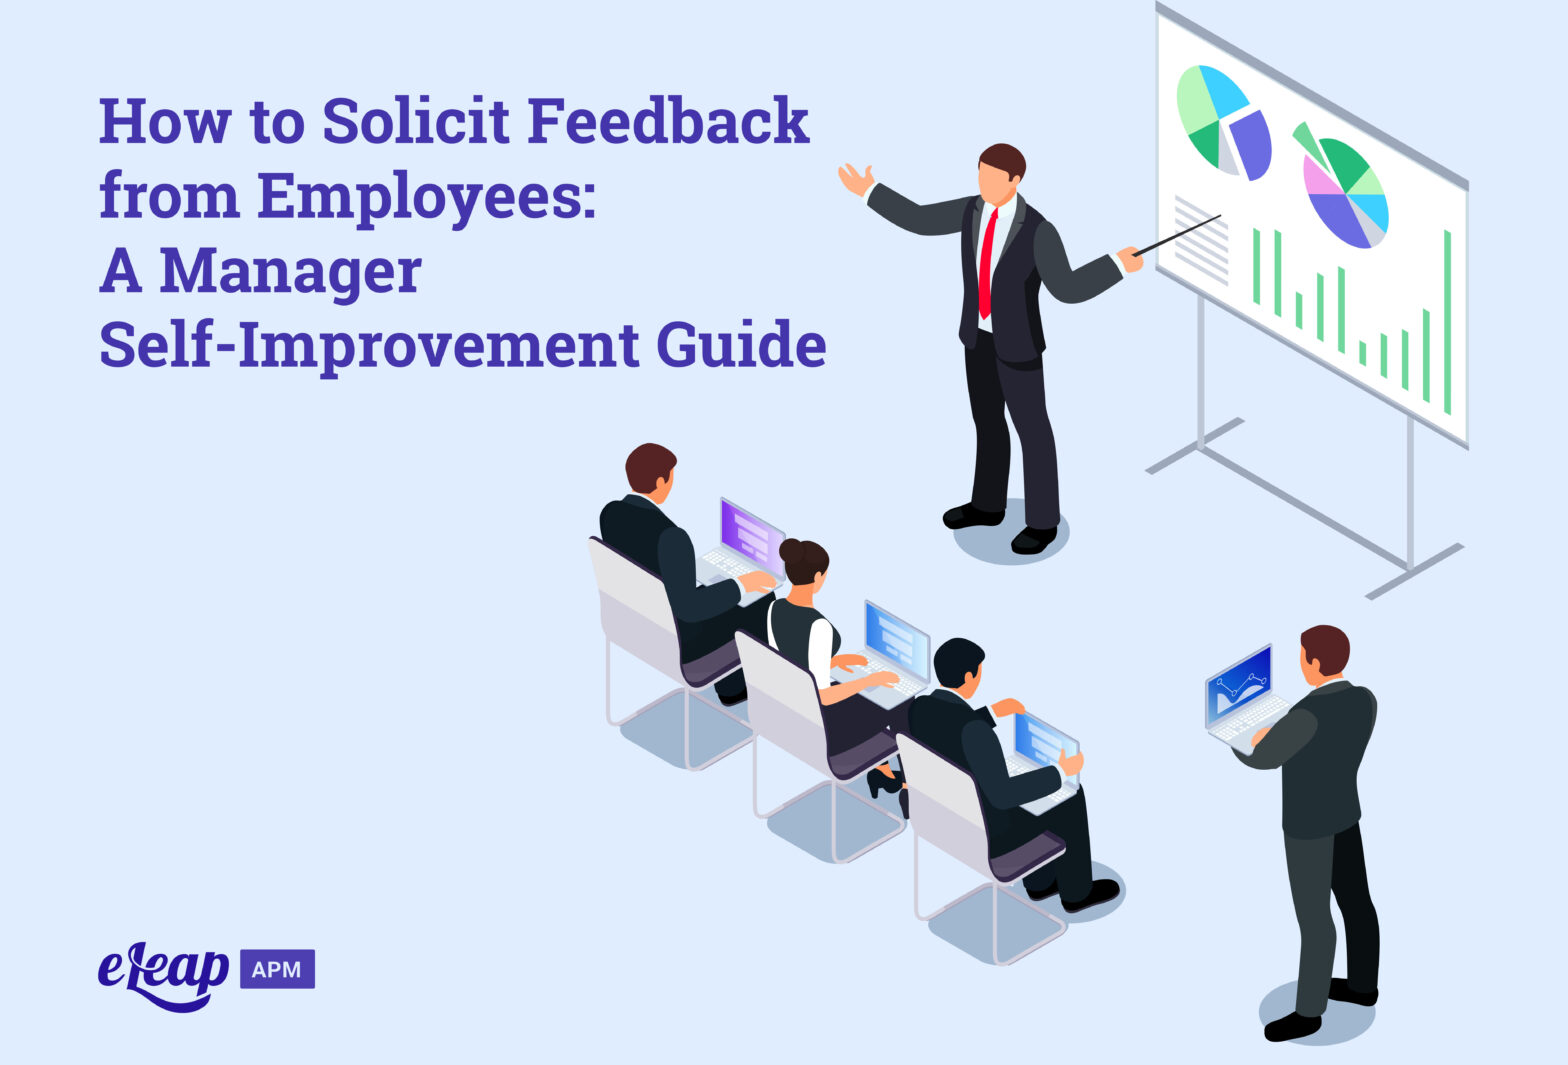 How to Solicit Feedback from Employees: A Manager Self-Improvement Guide